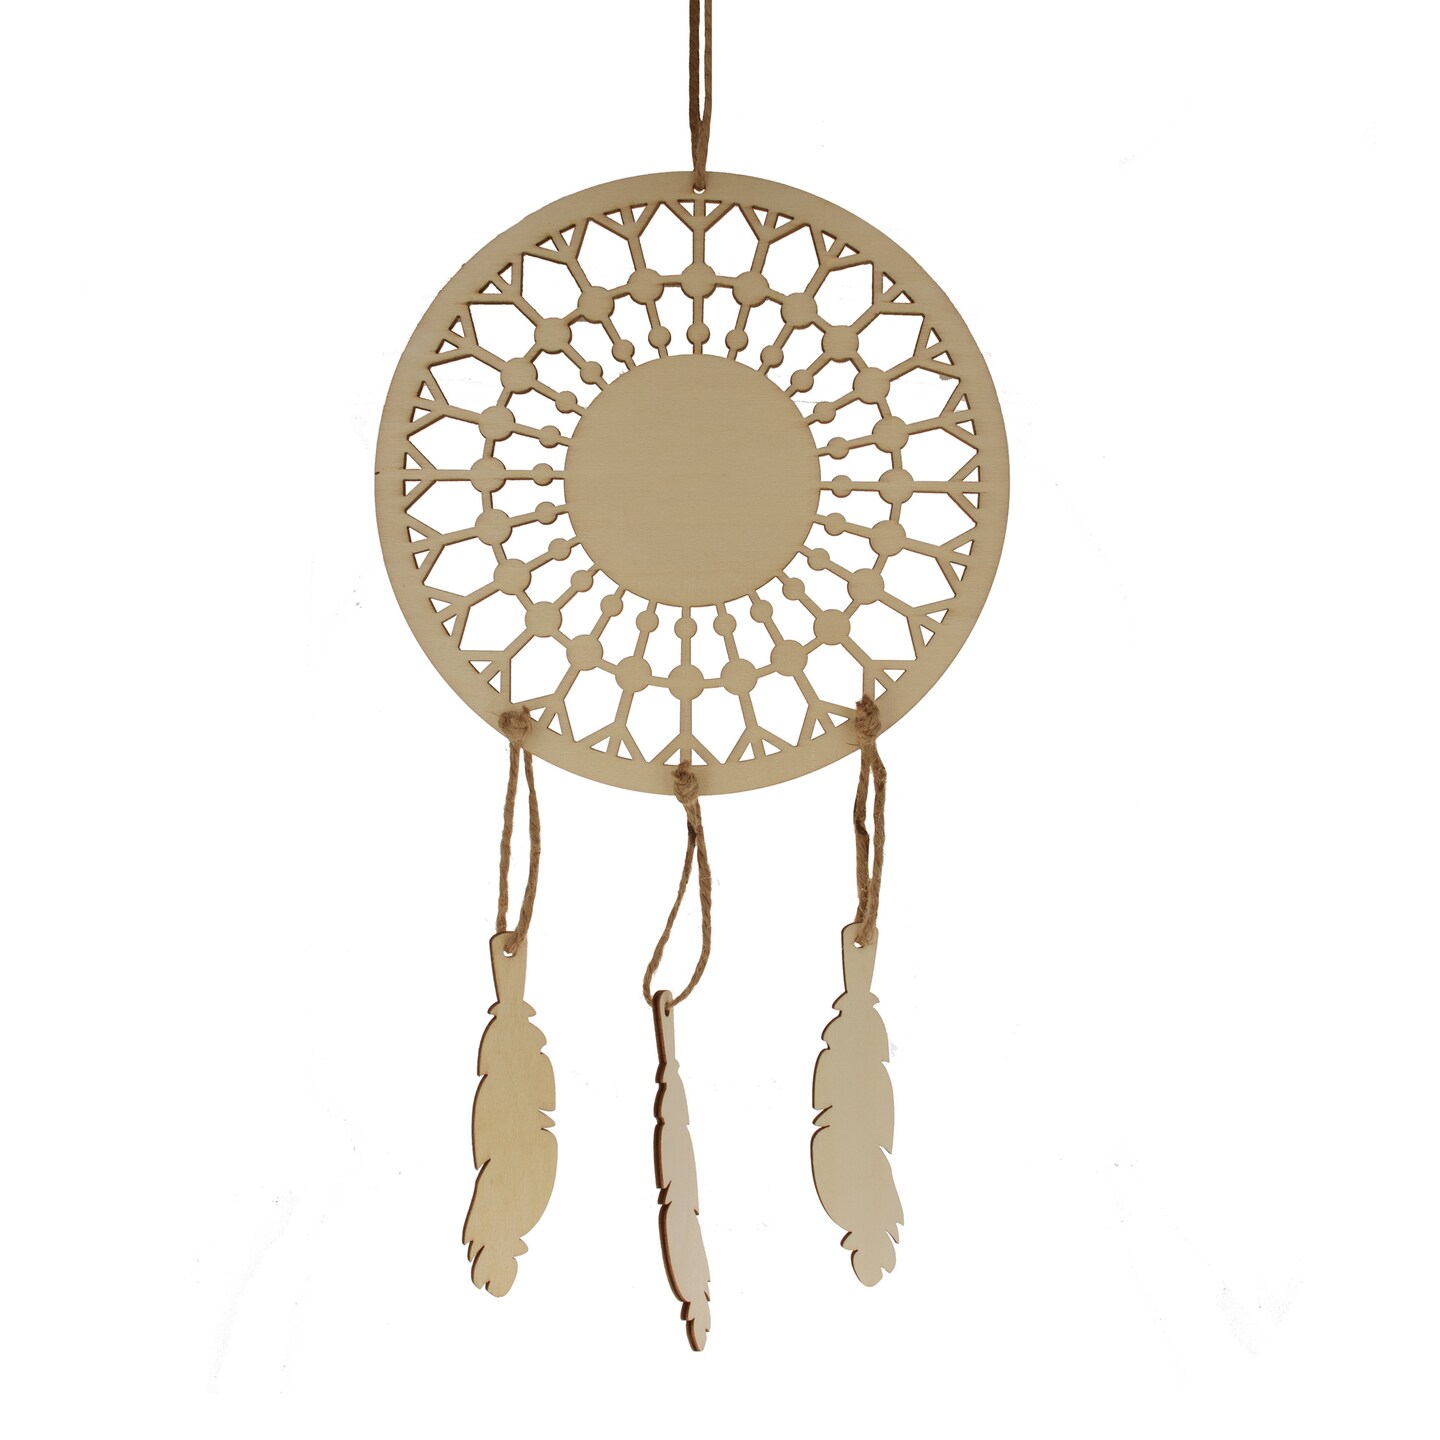 Unfinished Wooden Dream Catcher Cutout DIY Craft 7.8 Inches